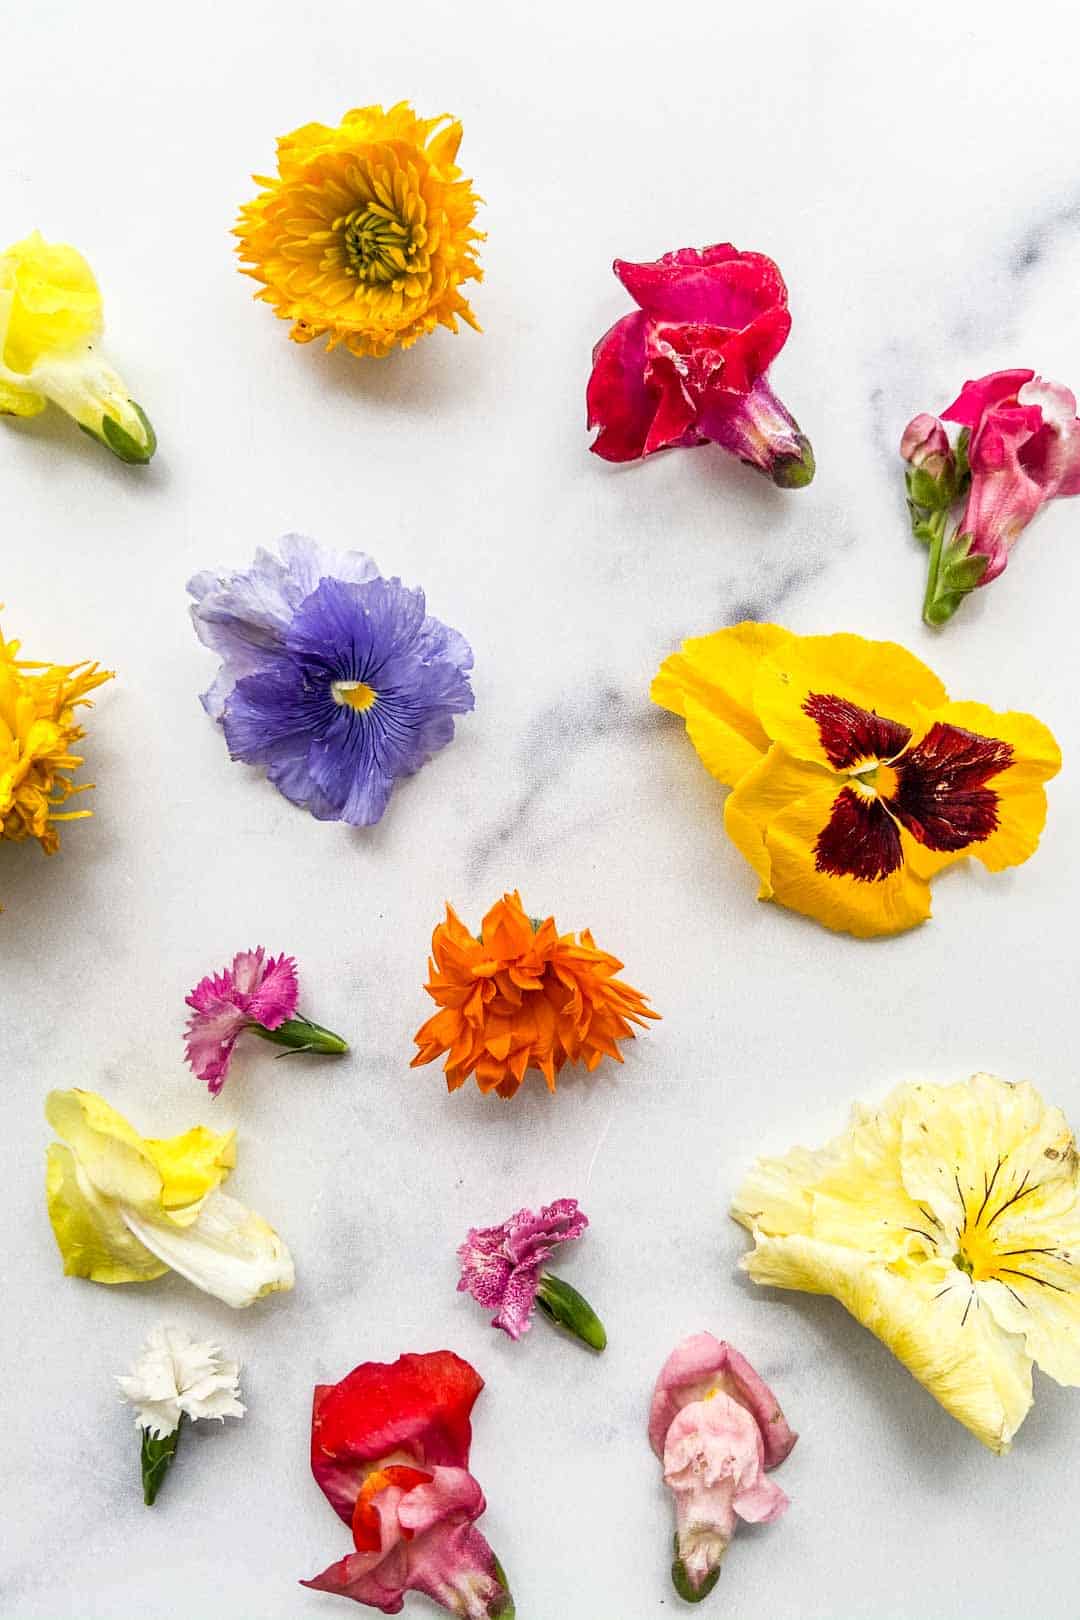 Edible Flowers Ideas For Cakes, Cocktails And More